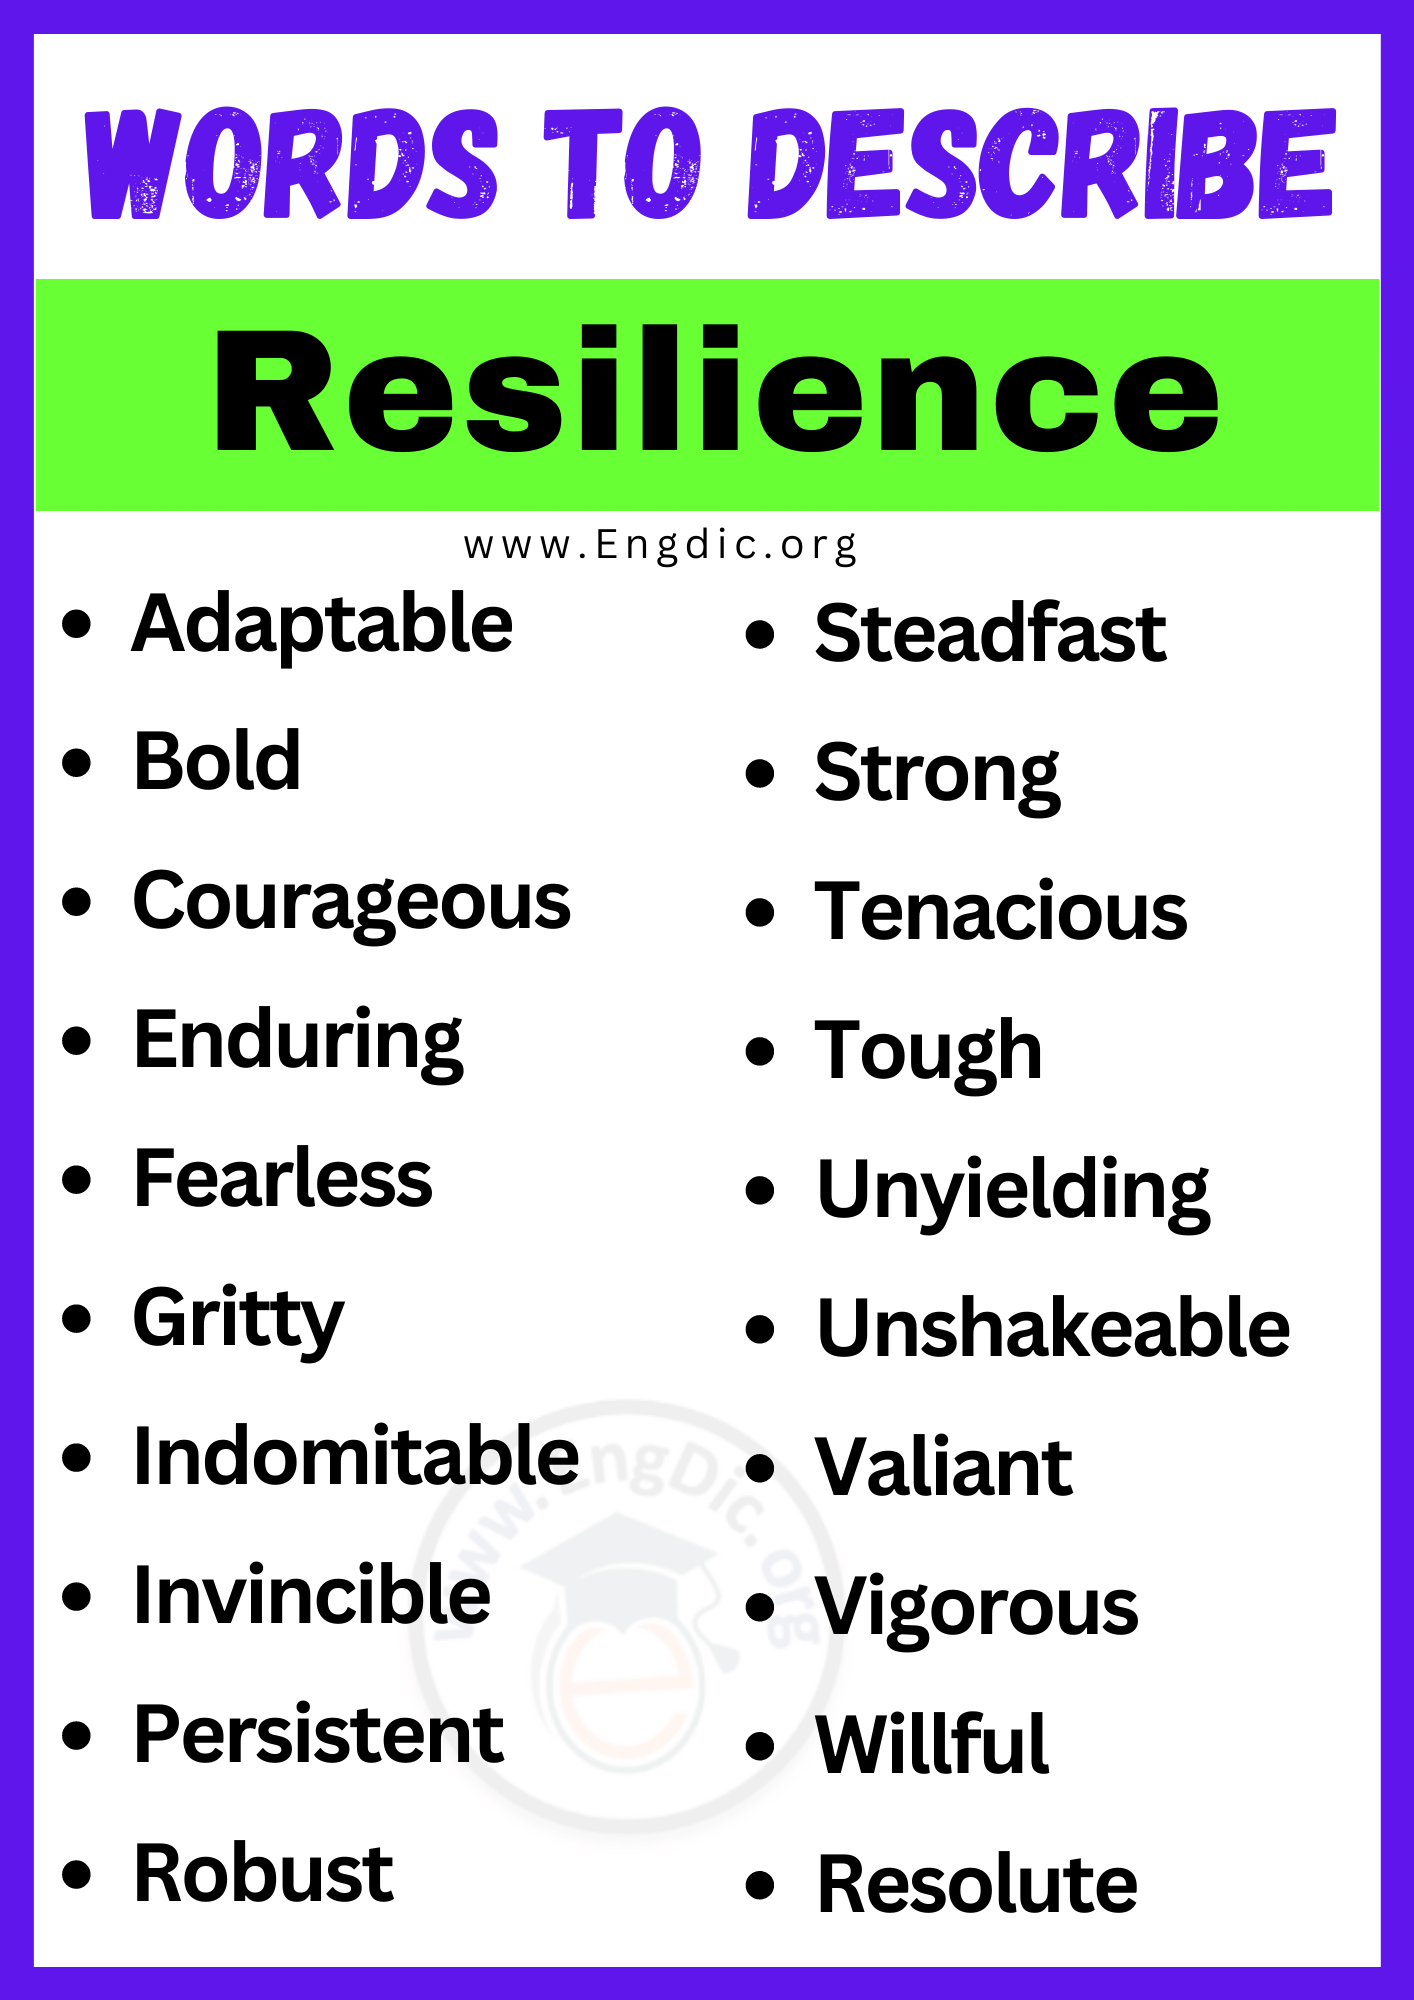 Words to Describe Resilience